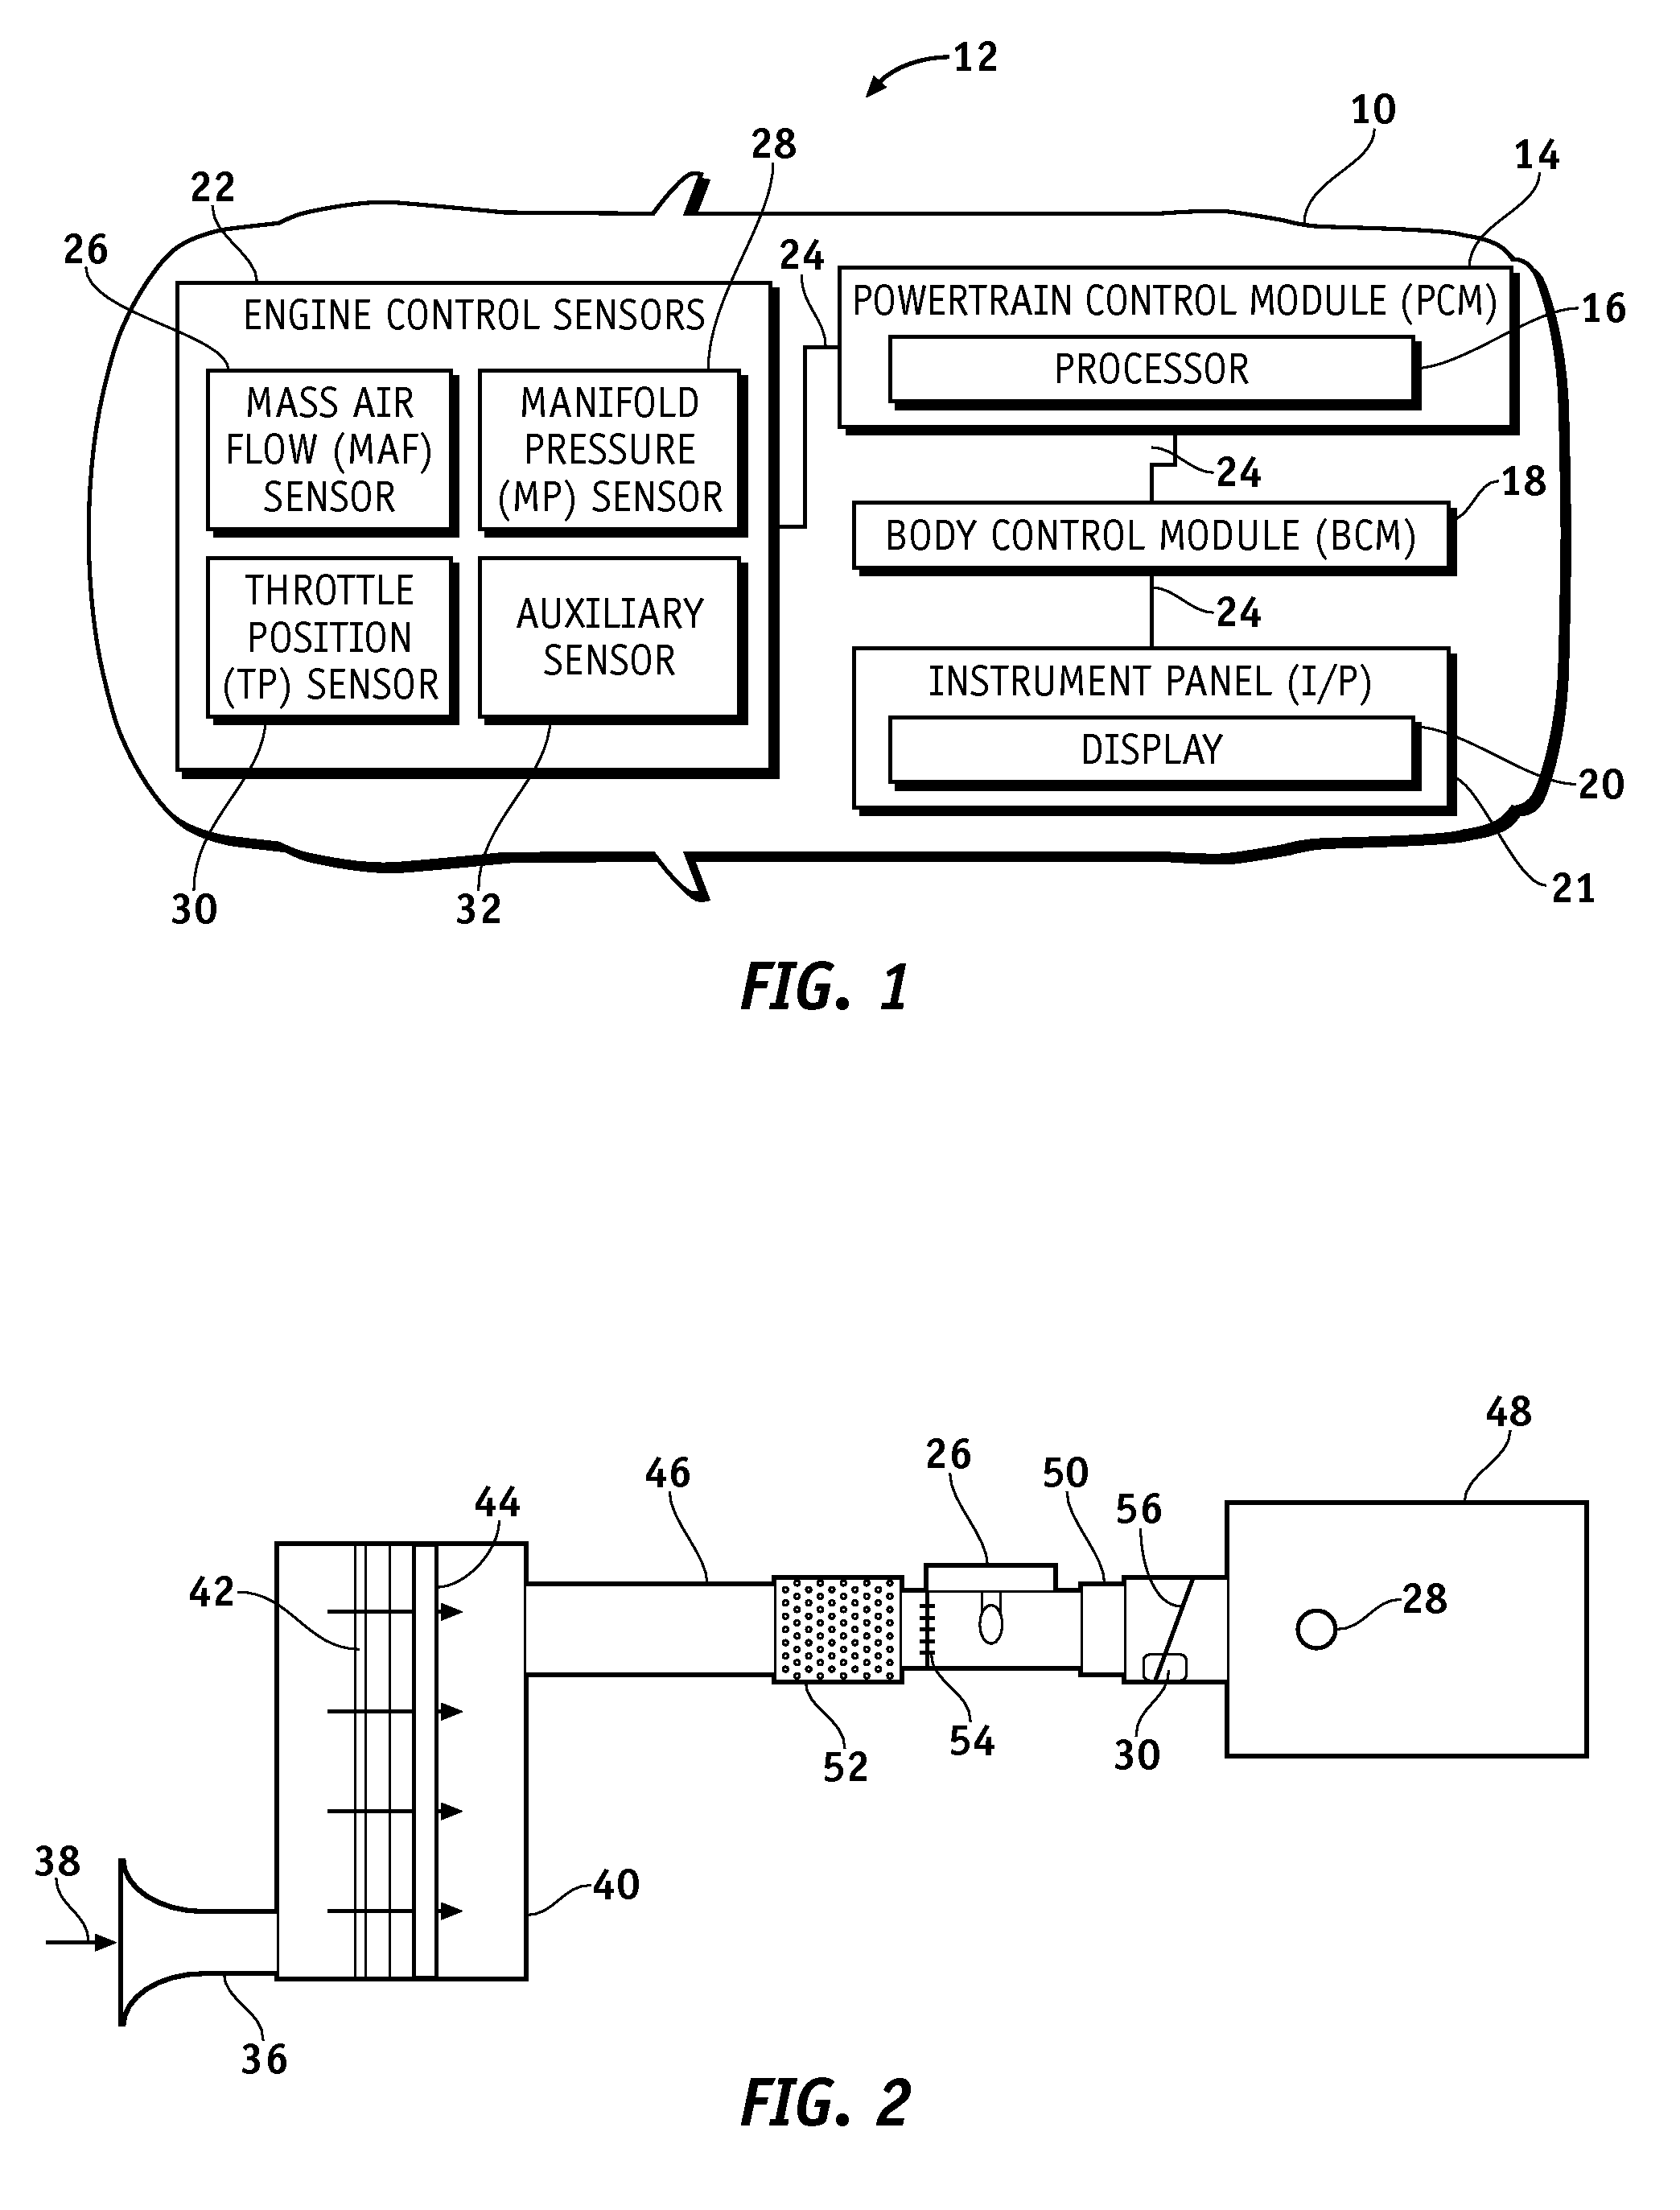 Method and Apparatus for Monitoring the Restriction Level of a Vehicular Air Filter Element